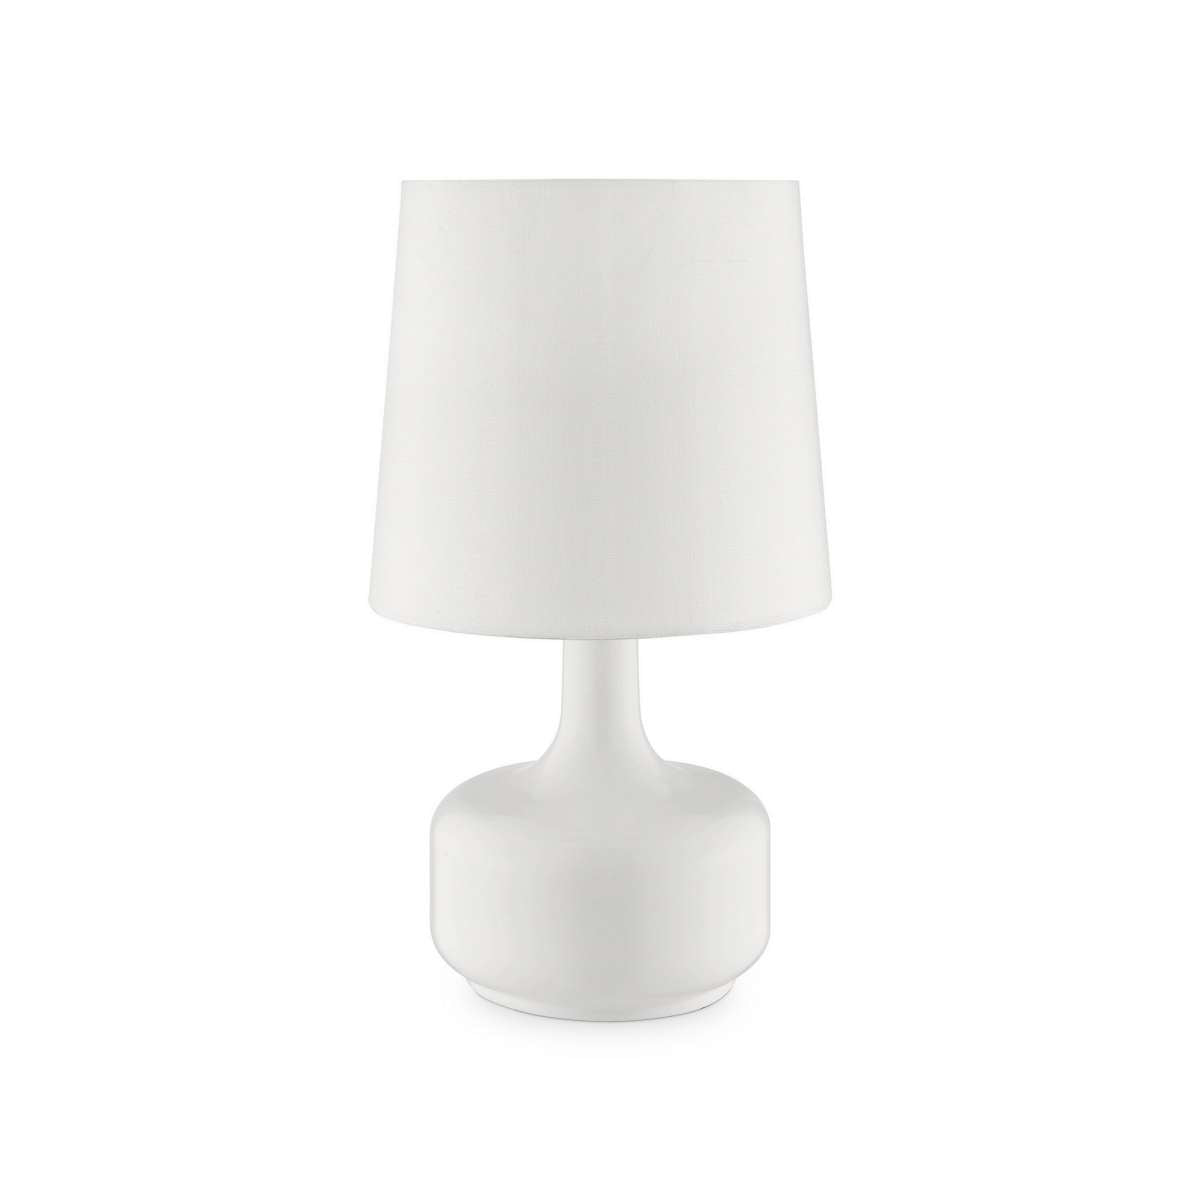 Table Lamp With Teardrop Metal Base And Fabric Shade, White By Benzara